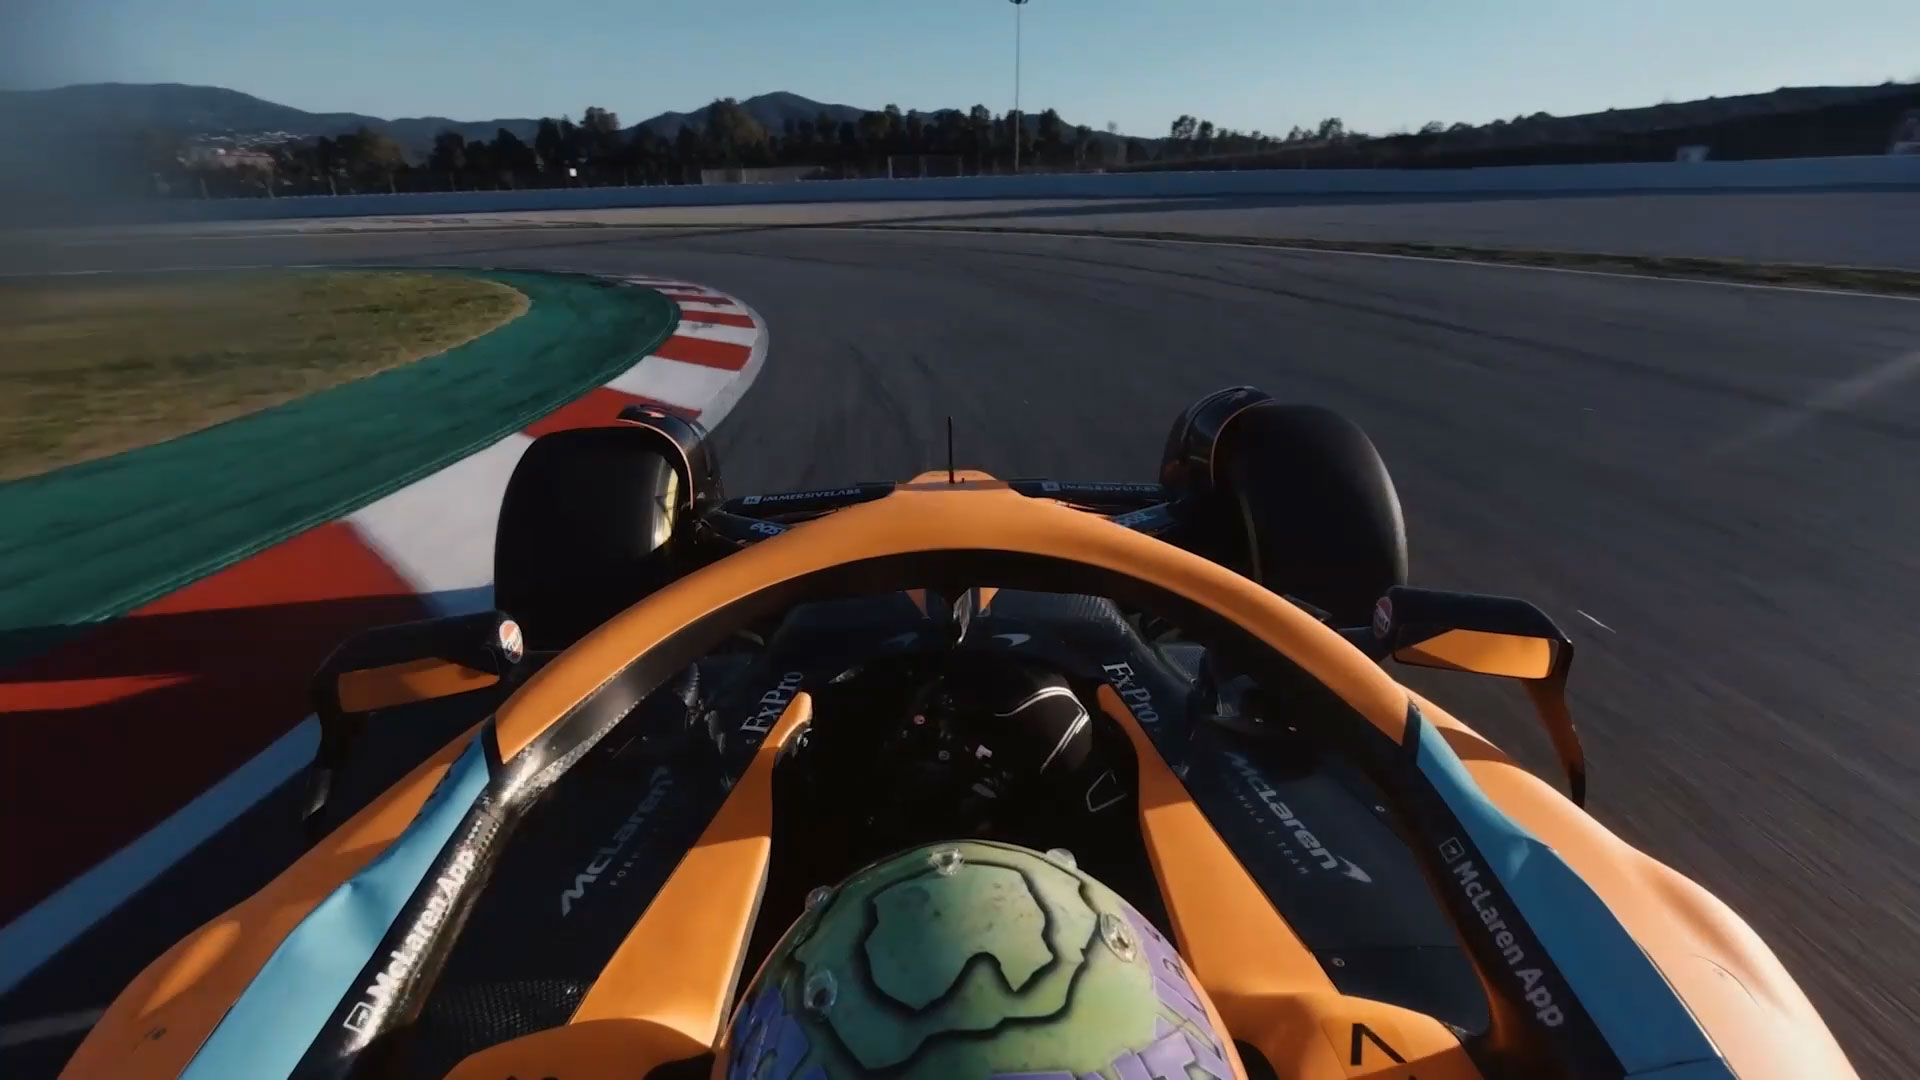 Smartsheet is removing their logo from McLaren’s Formula 1 cars at the Australian Grand Prix to give the spotlight to nonprofit, DeadlyScience. DeadlyScience's mission is to provide STEM resources and mentoring to Aboriginal and Torres Strait Islander students.